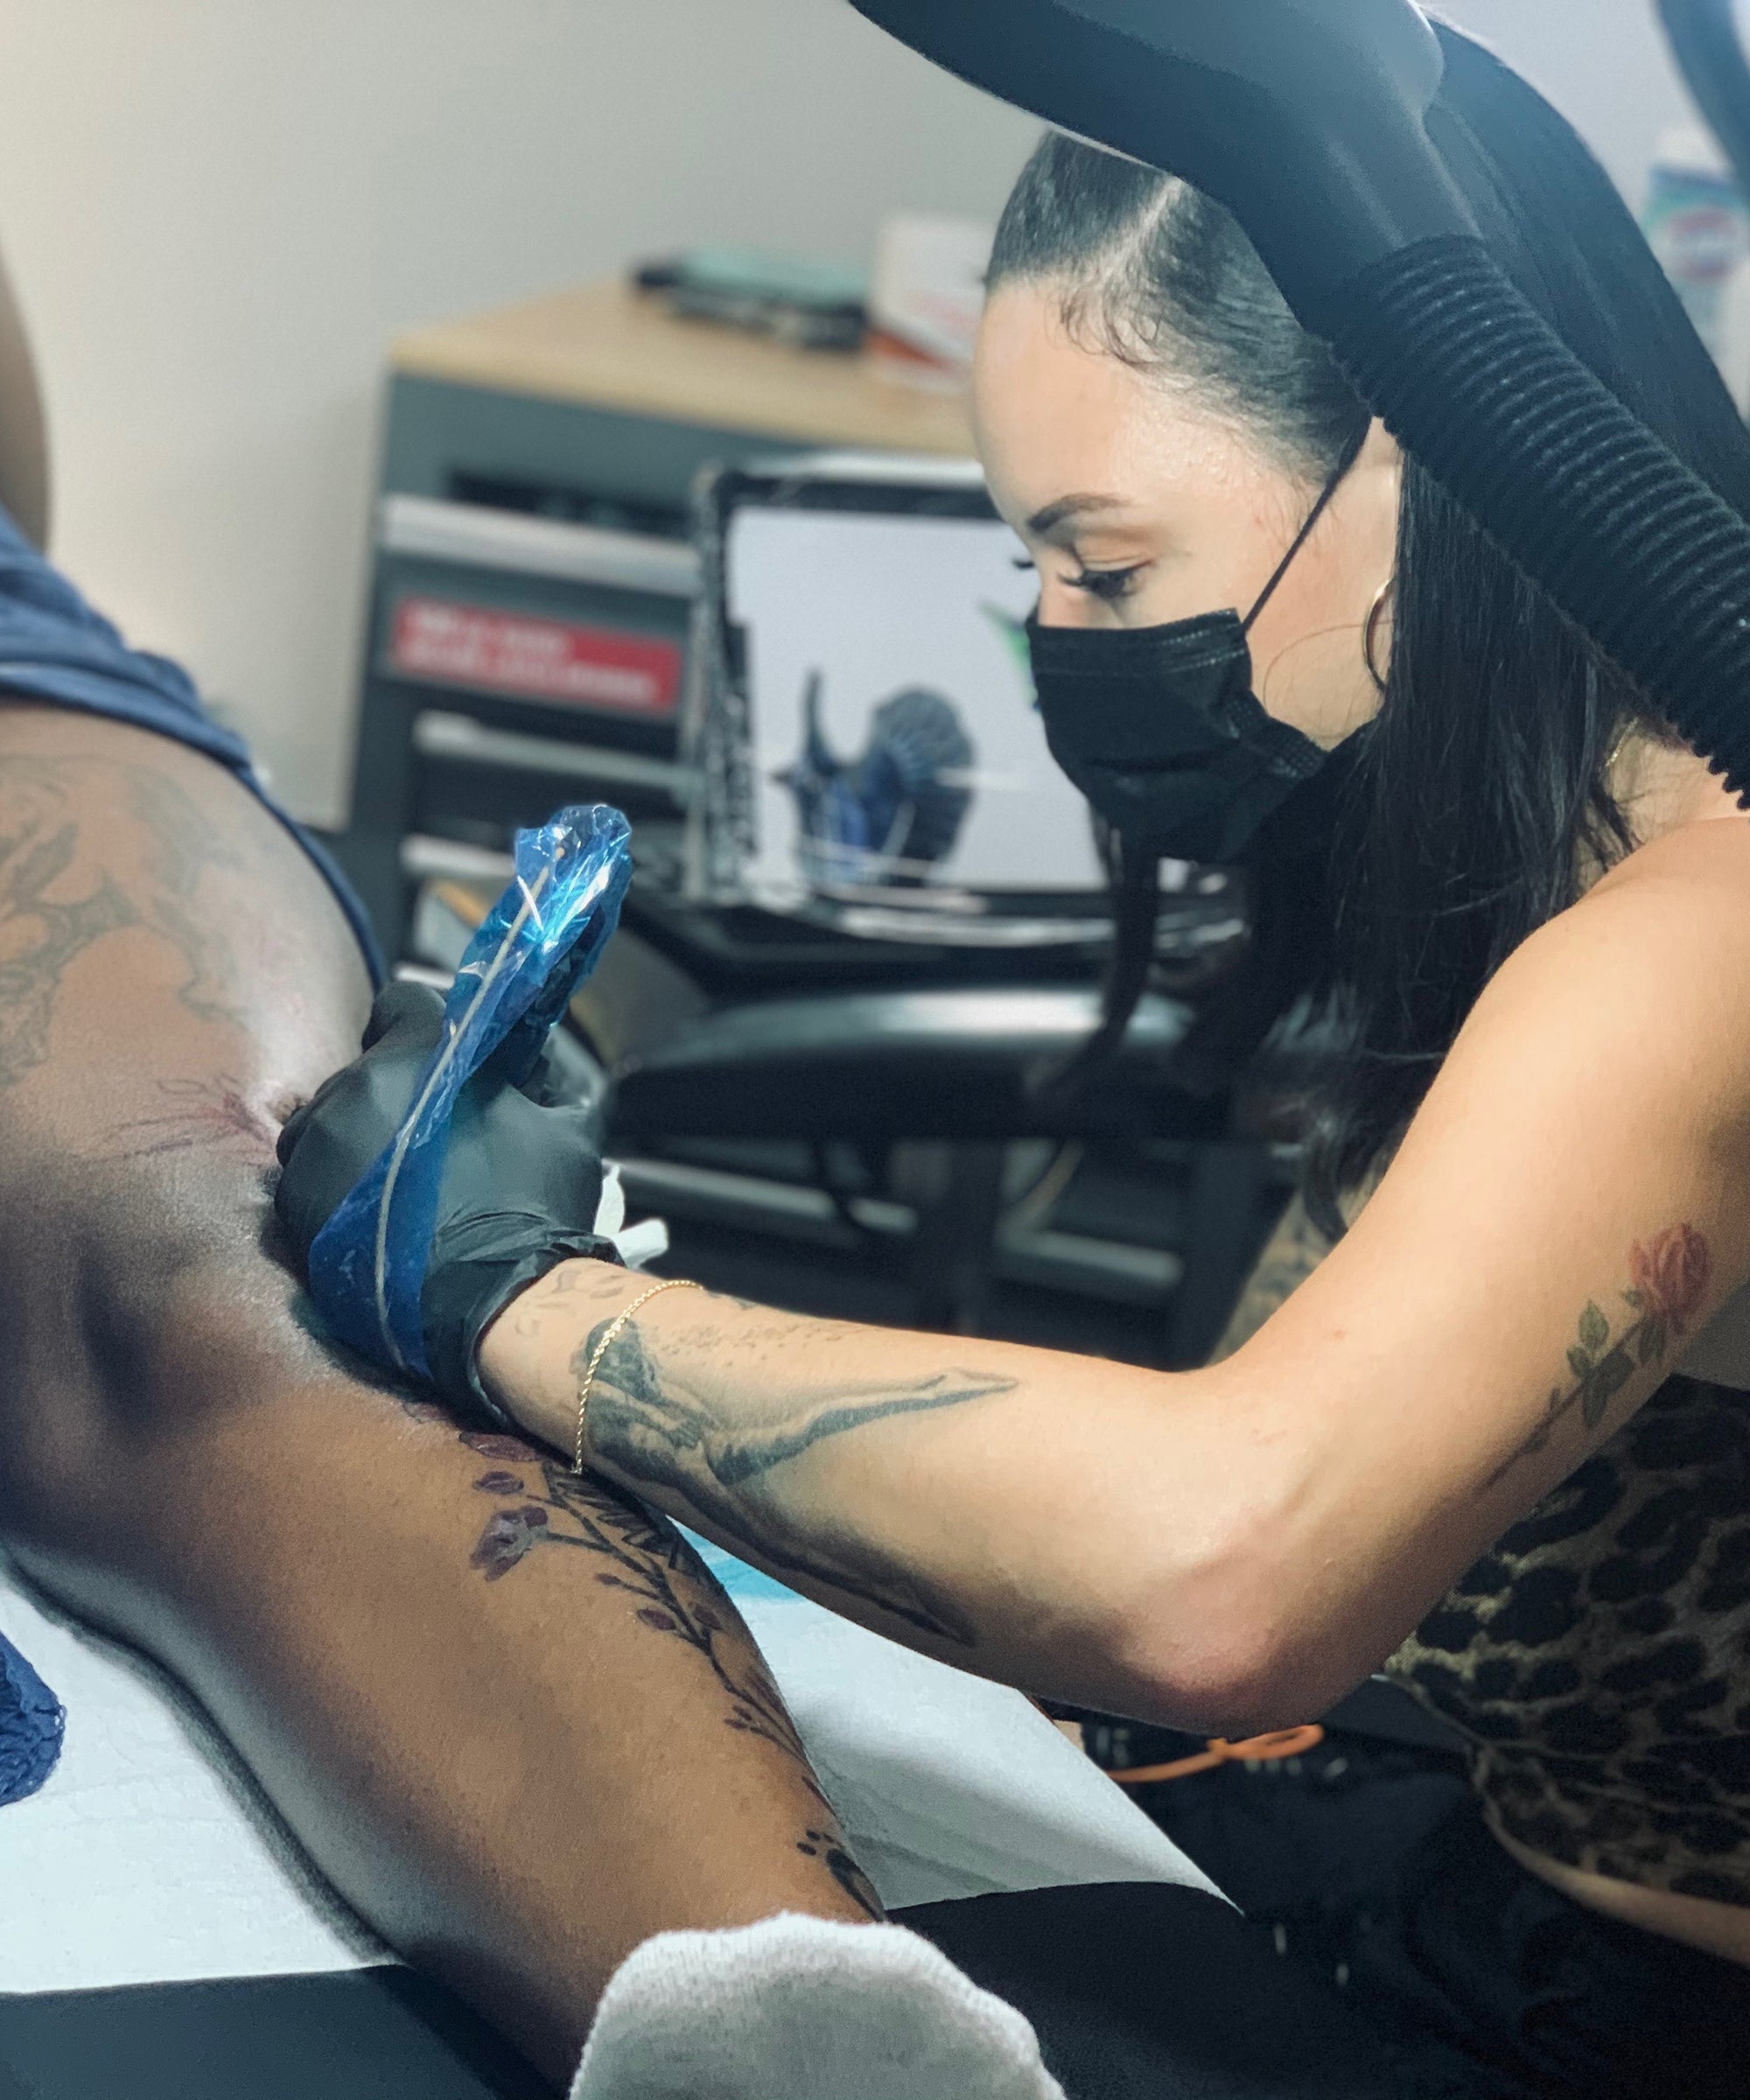 Why People Want To Get A Tattoo More During COVID-19